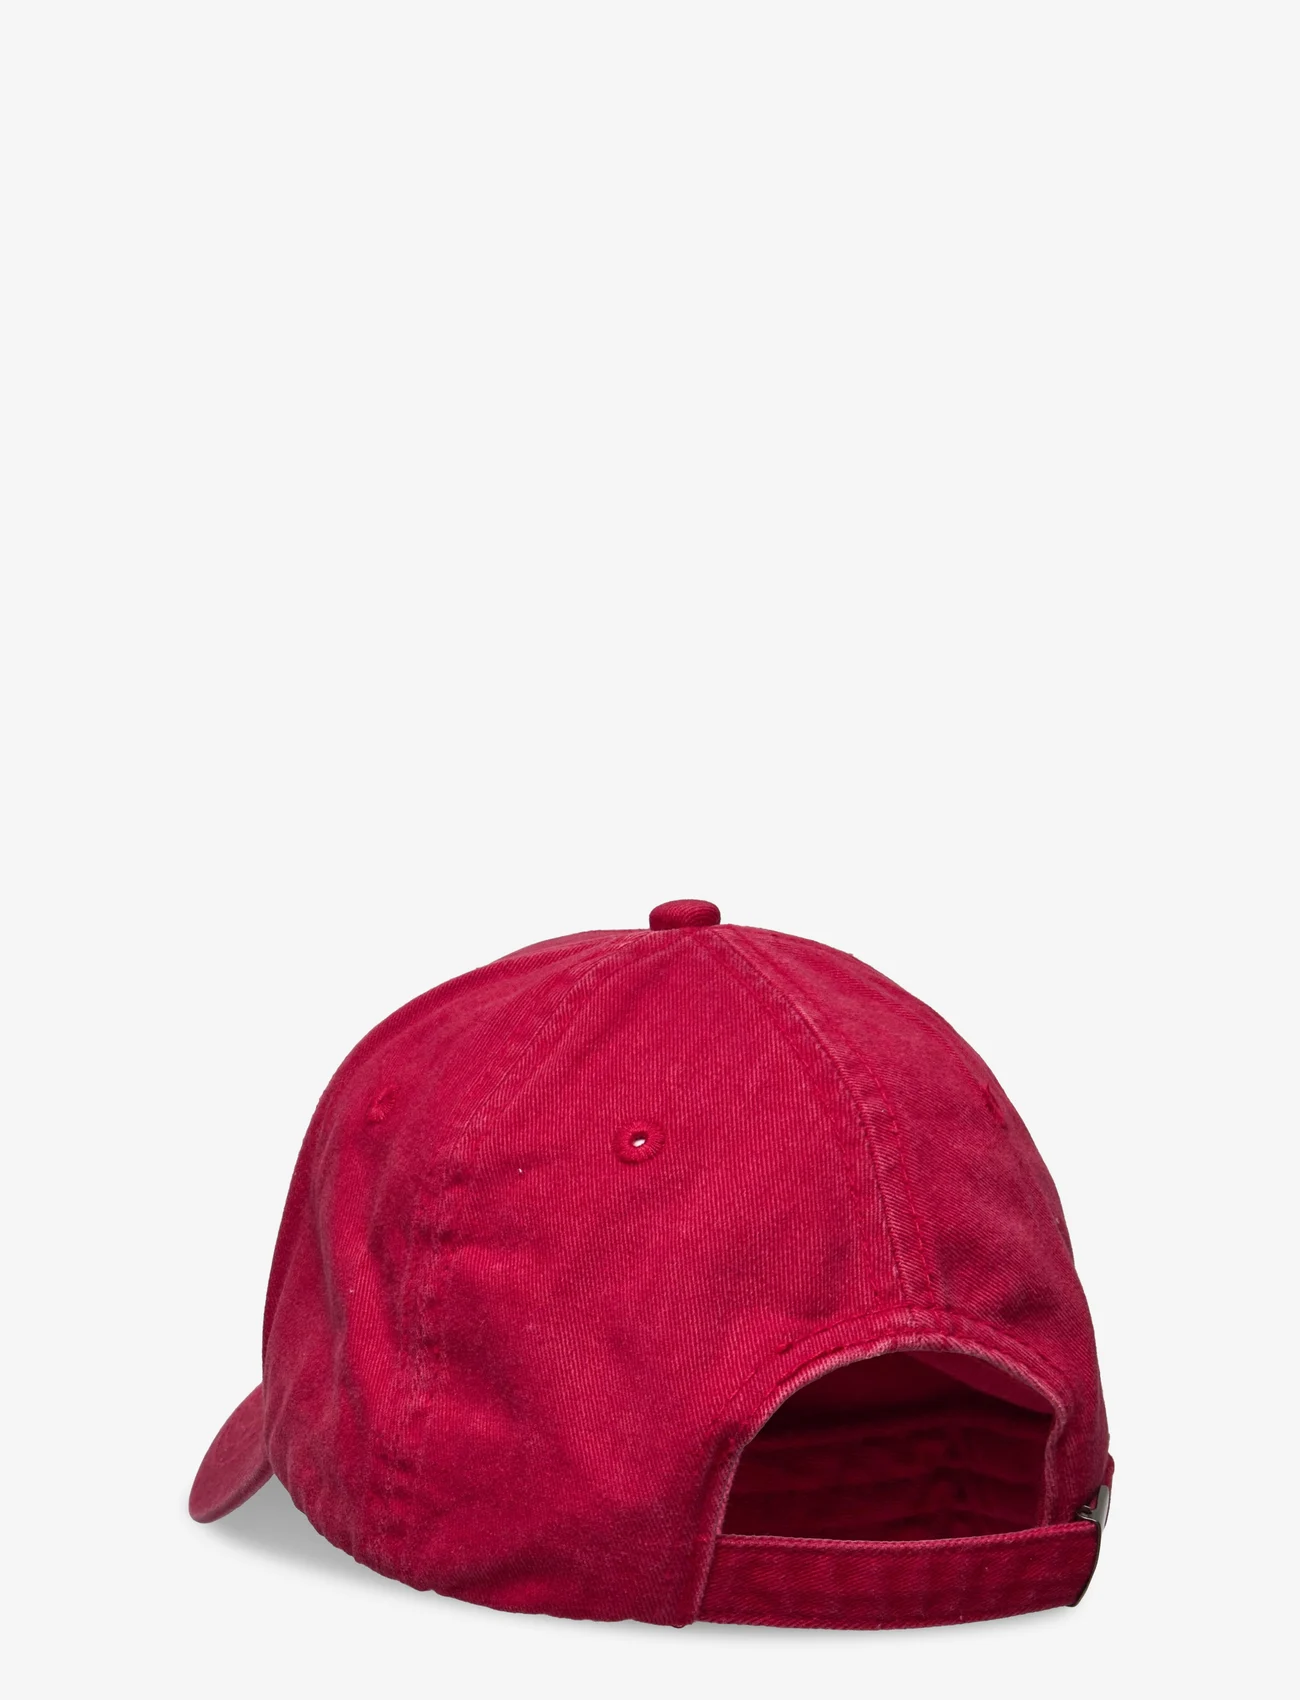 HOLZWEILER - Sirup Washed Caps - kappen - red - 1